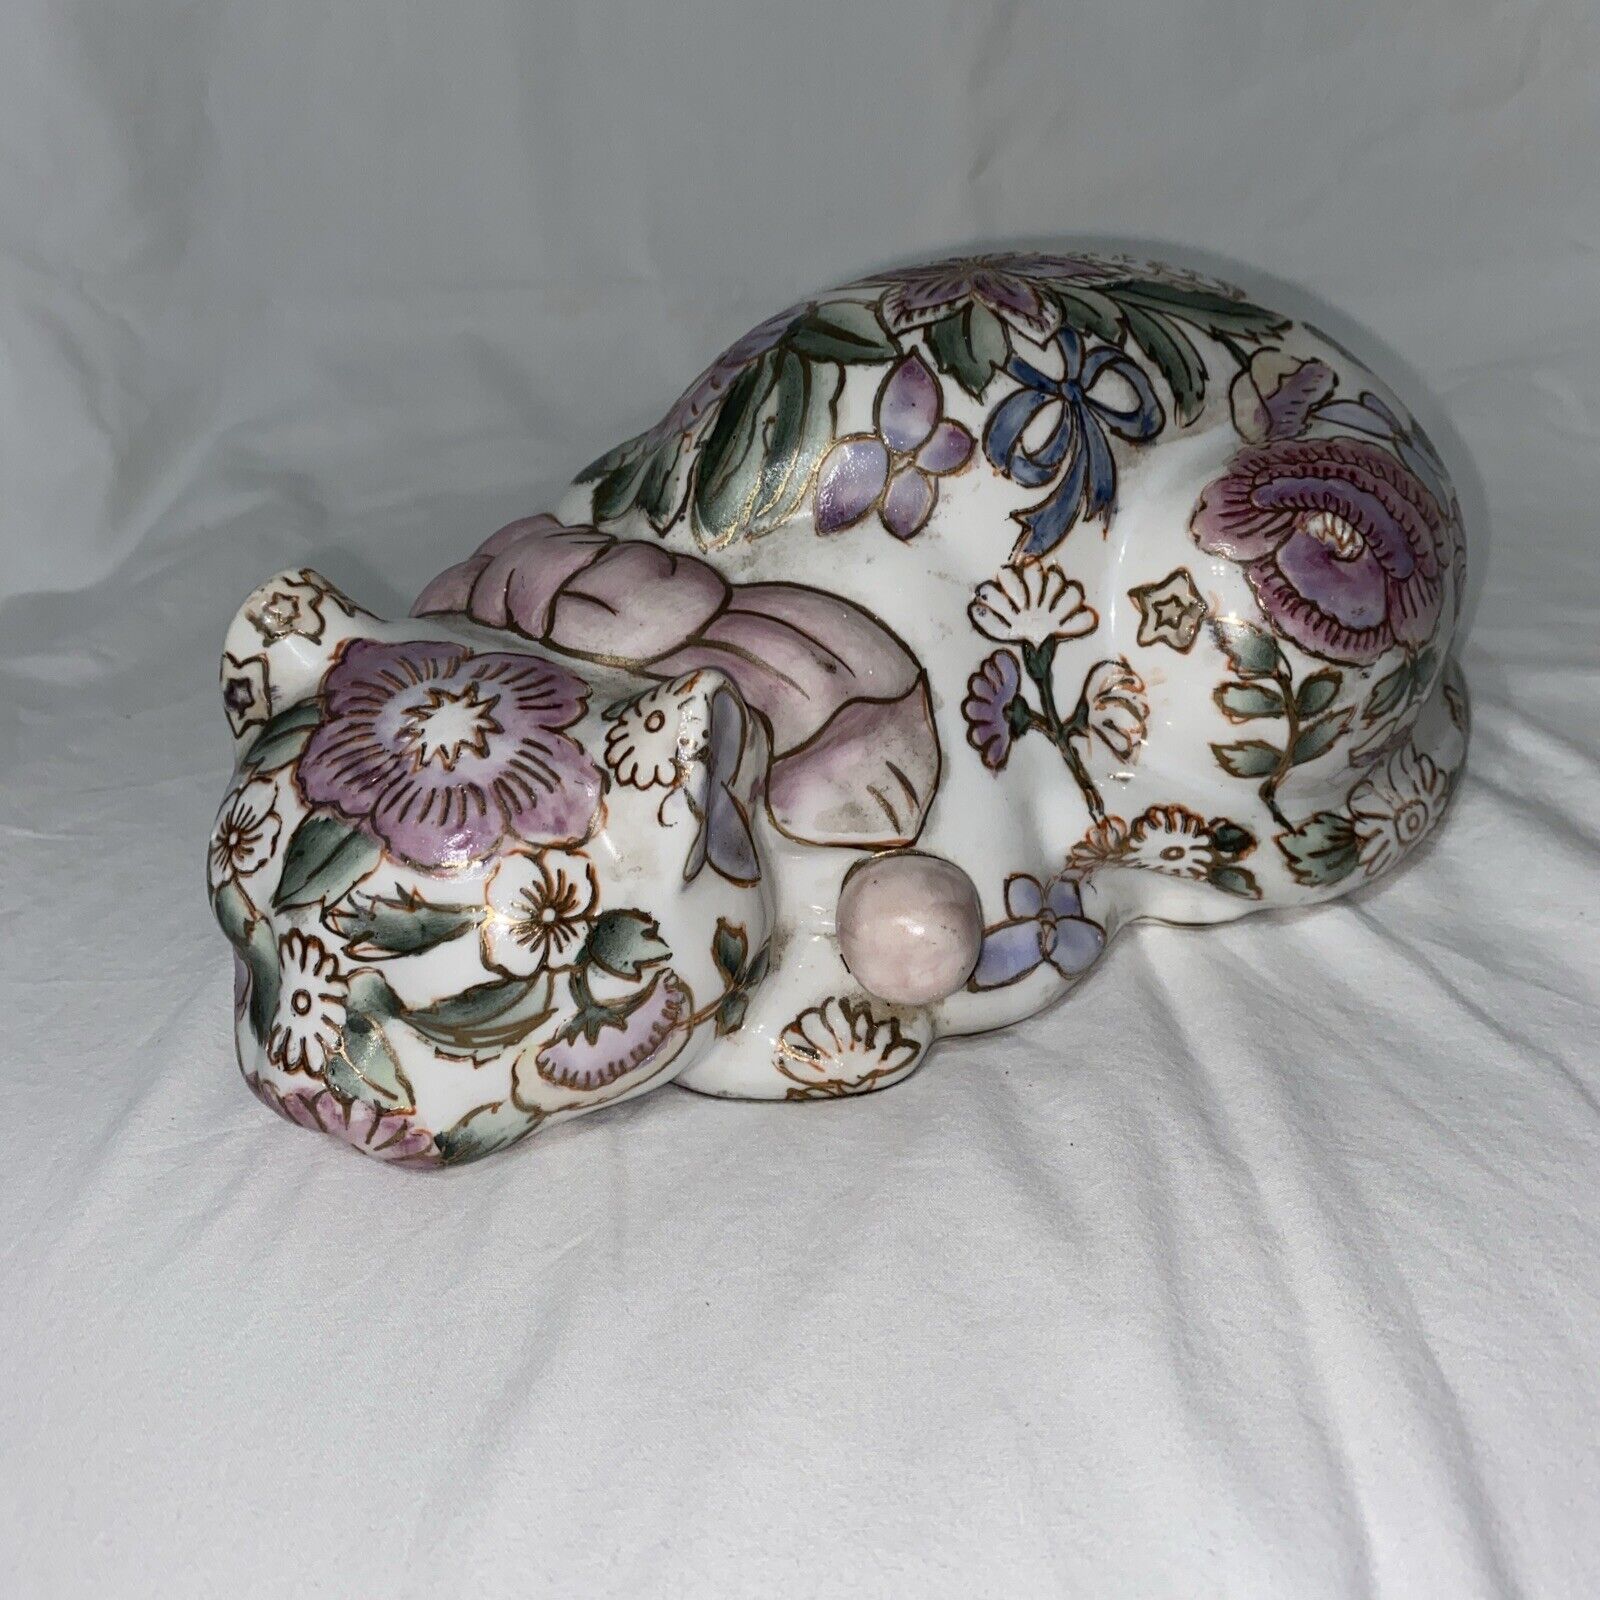 Vintage Cloisonné Cat Ceramic Floral Style Curled-Up Sleeping 9” Long Figurine